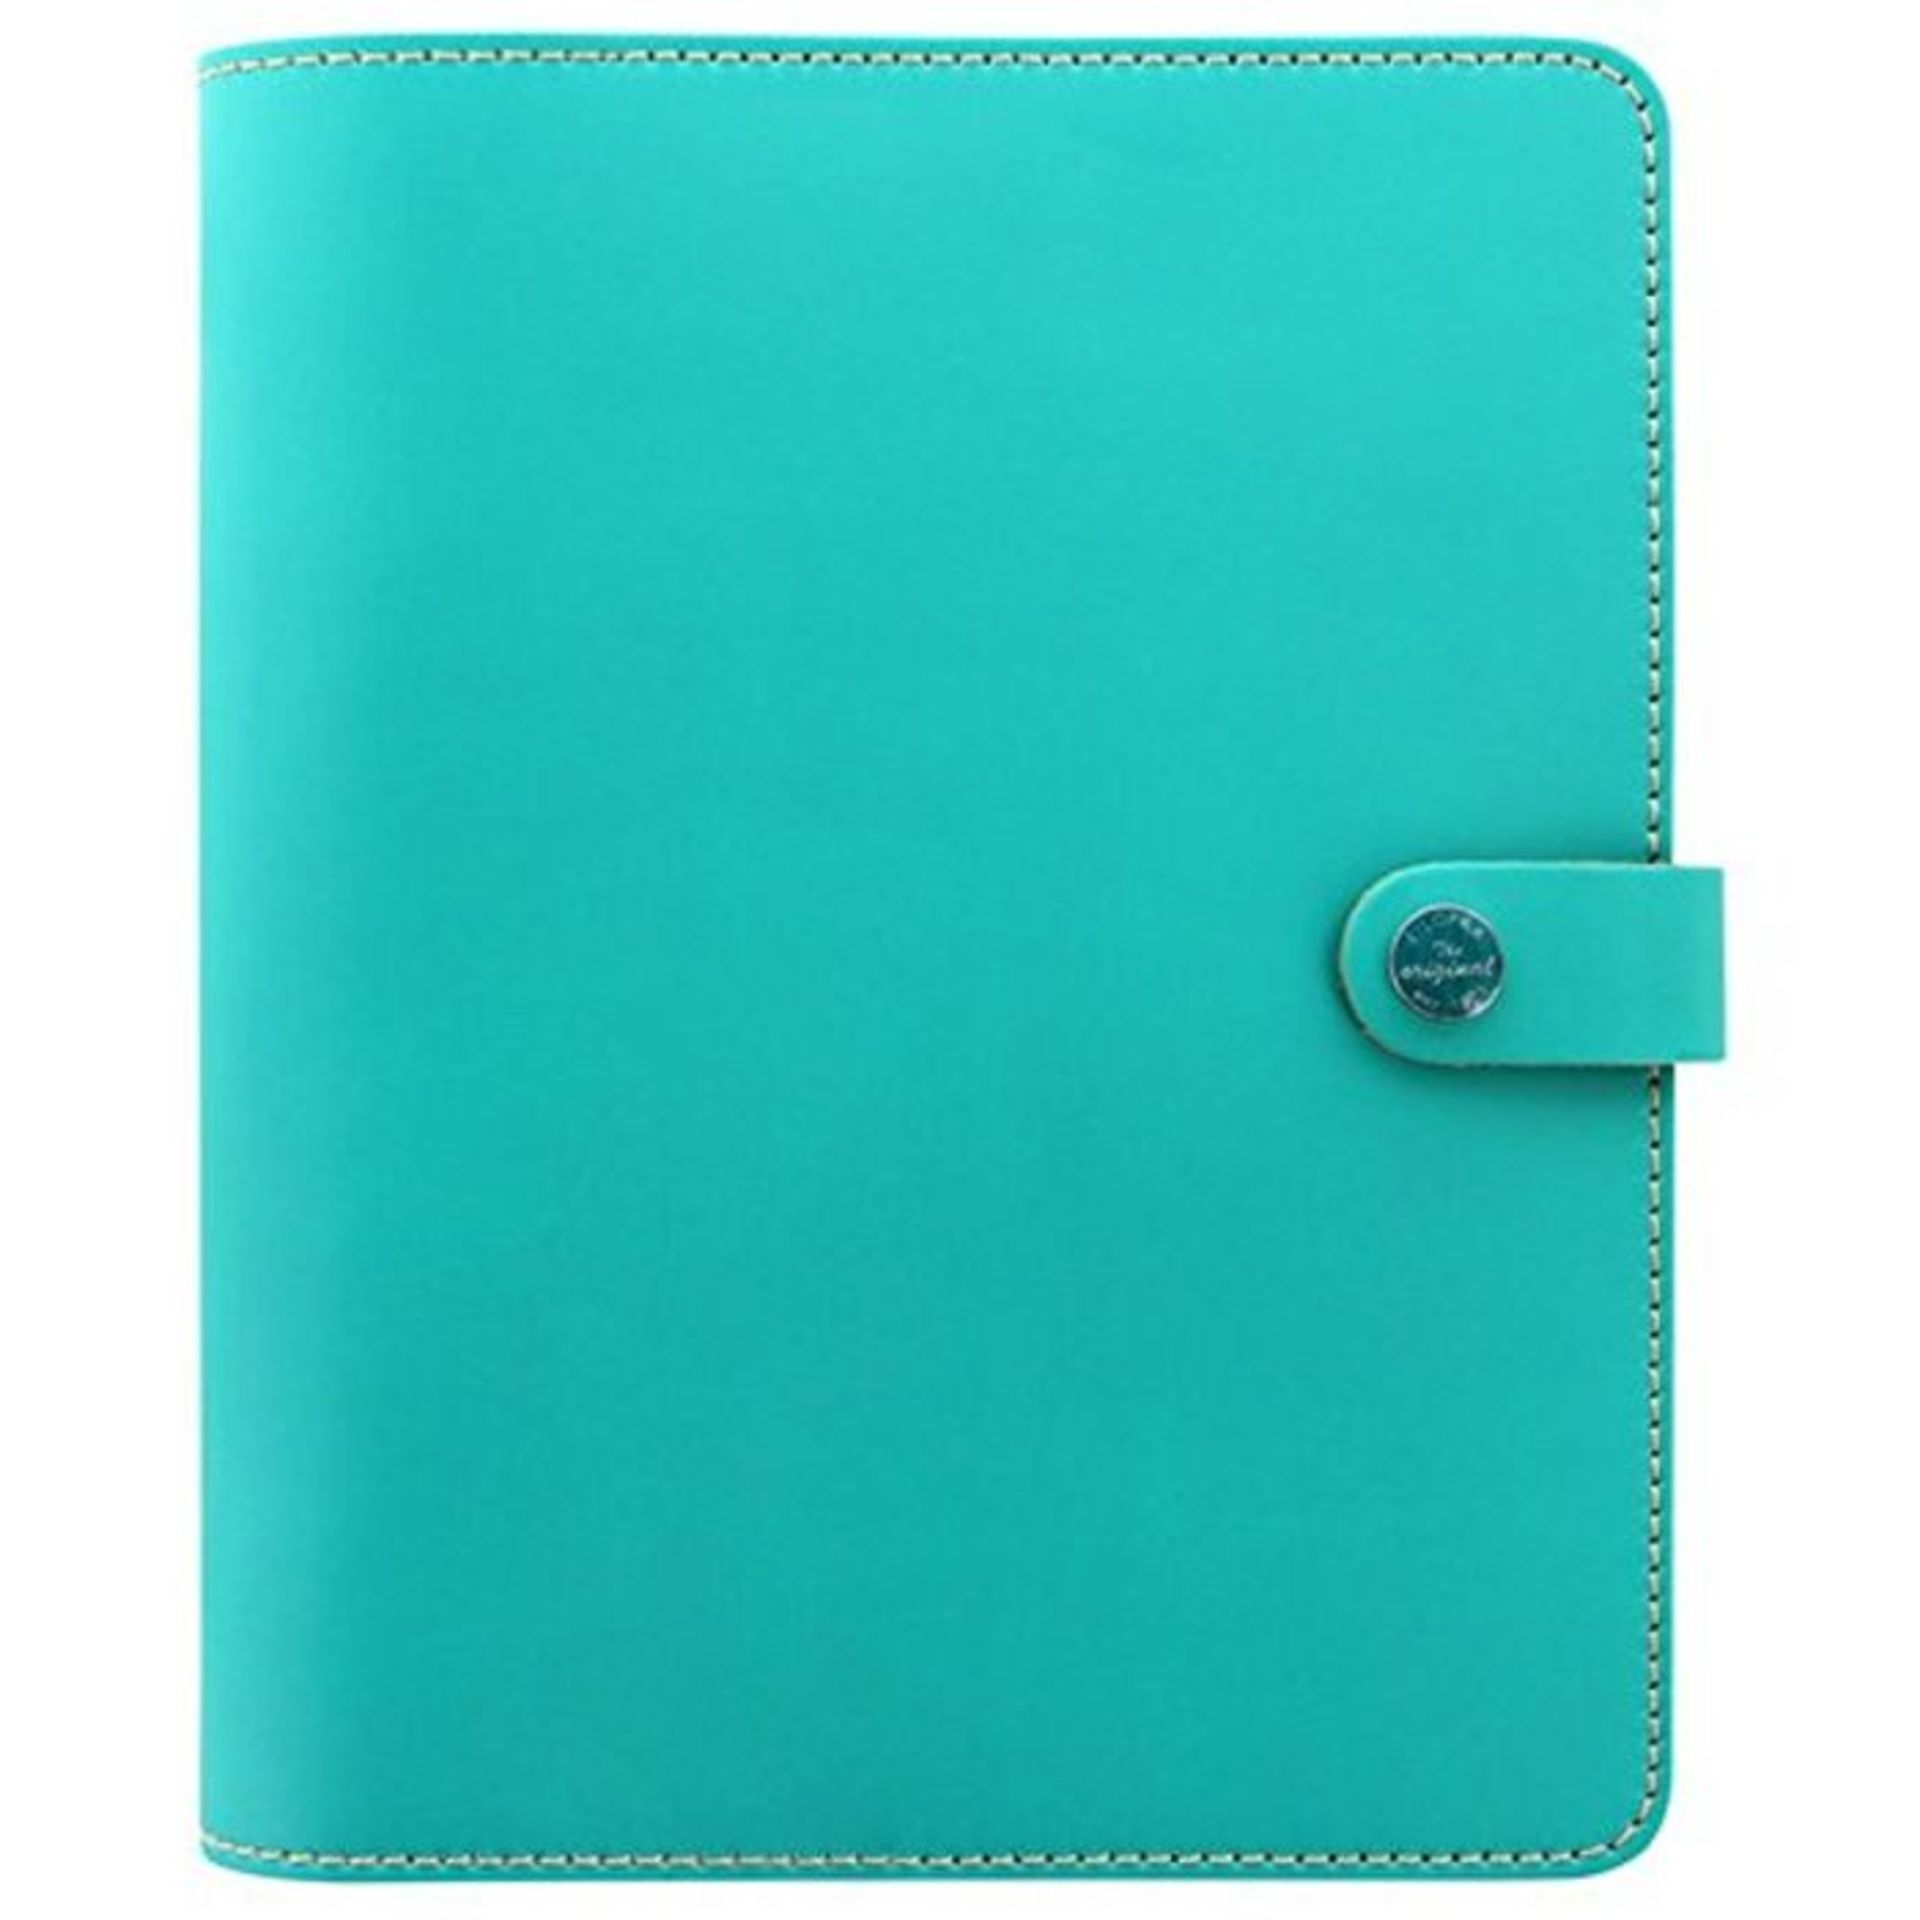 RRP £66.00 Filofax 00AY-022600 A5 The Original Turquoise Undated Diary